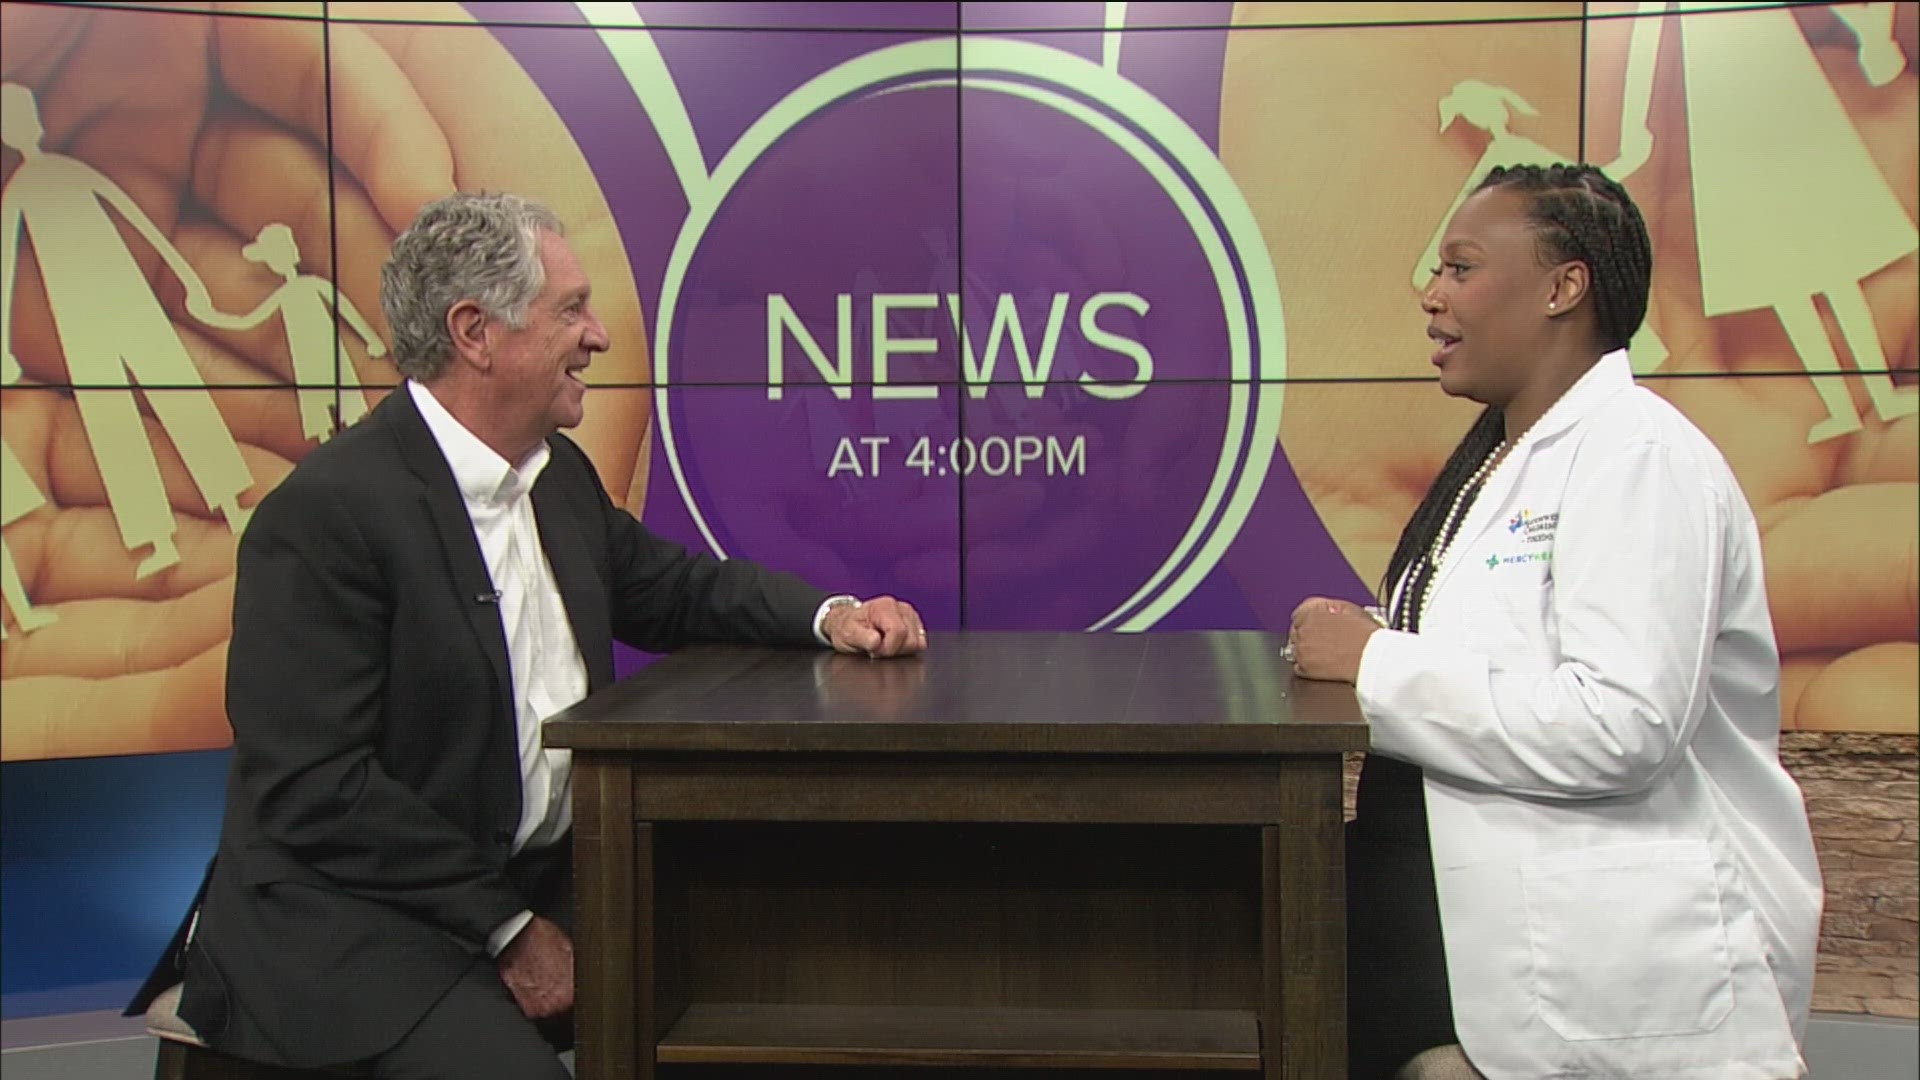 Dr. Sharnita Harris with Nationwide Children's Hospital - Toledo discusses resources at the Toledo Autism Center to meet the individual needs of children with autism